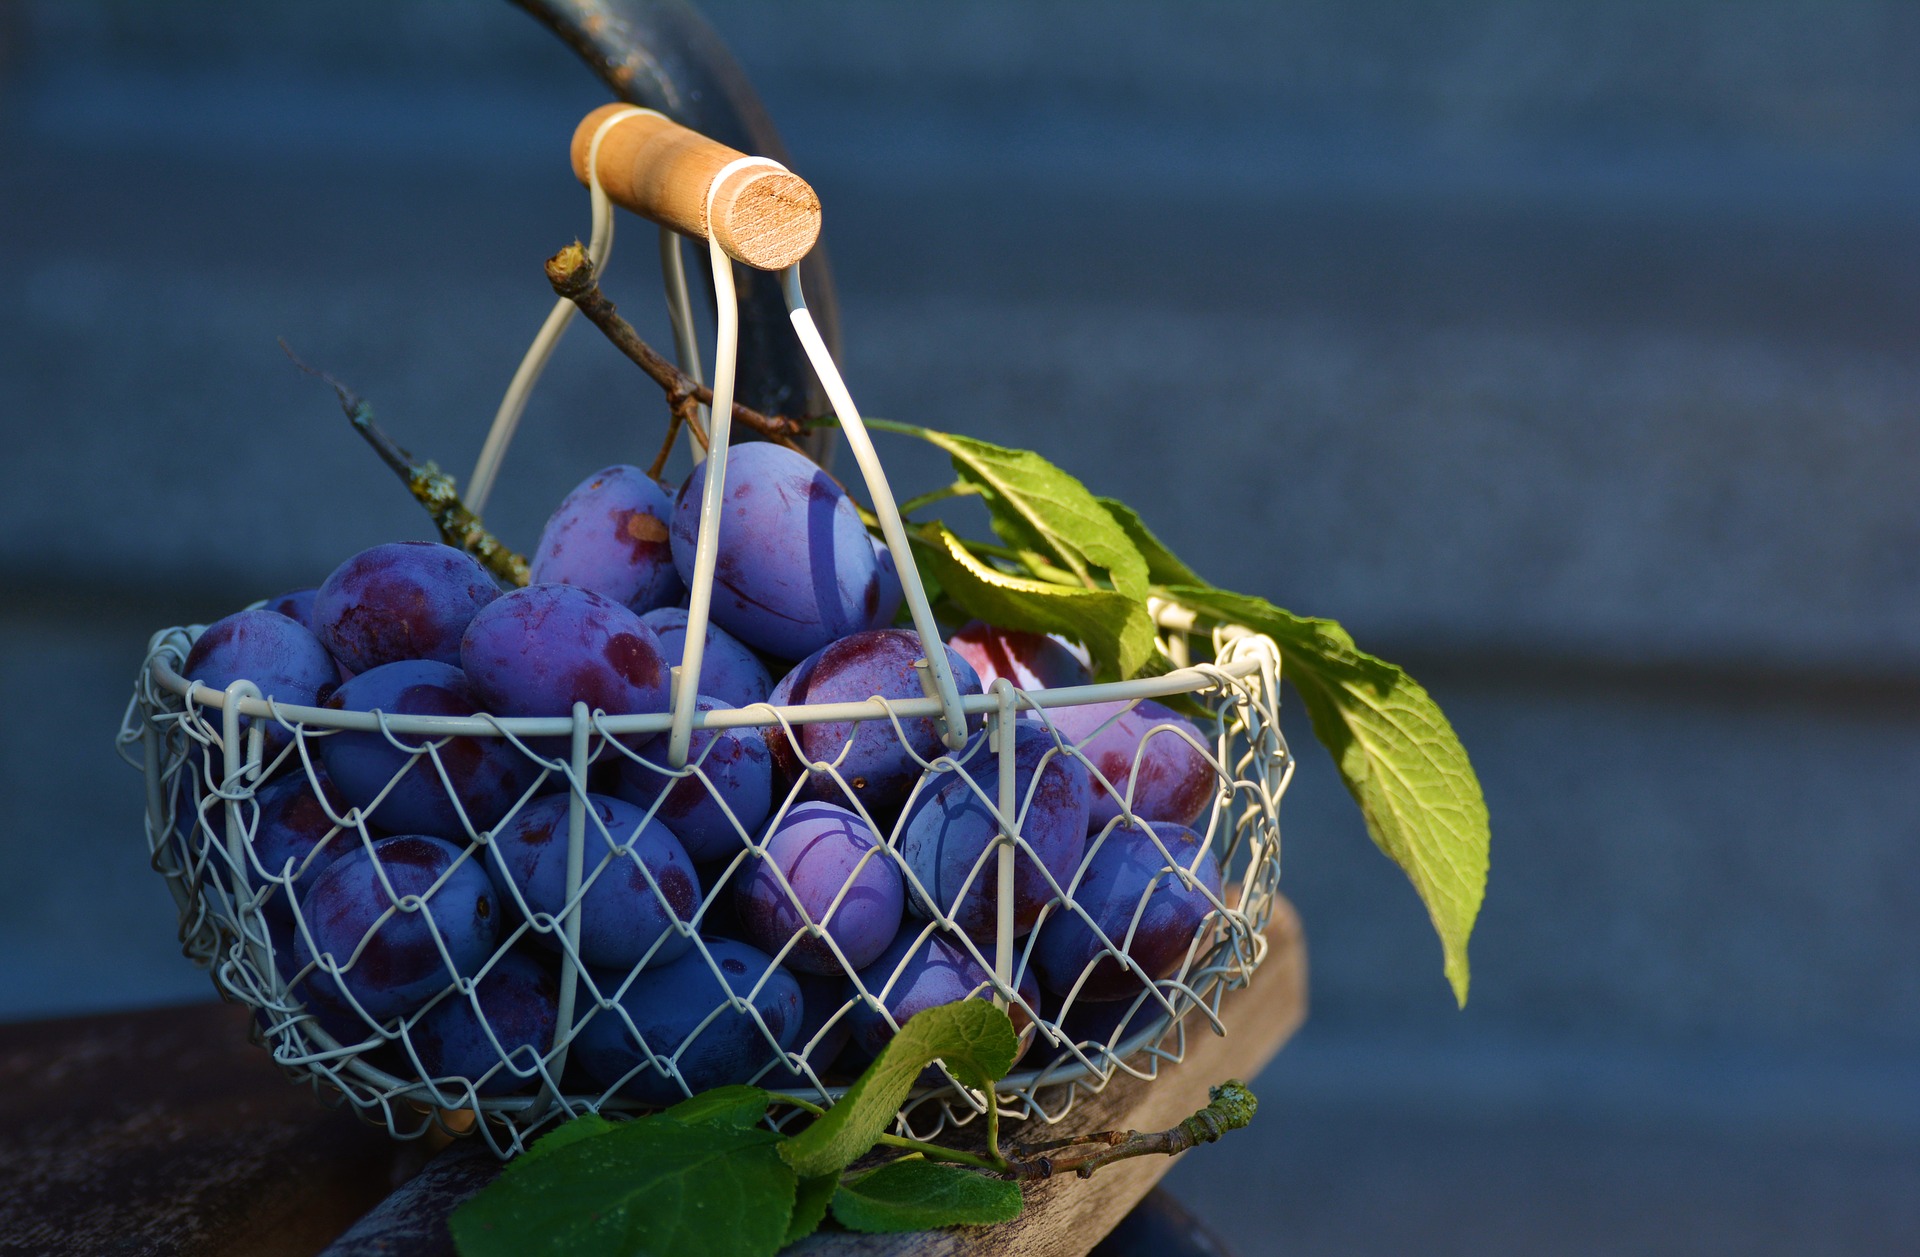 Plums in the basket photo